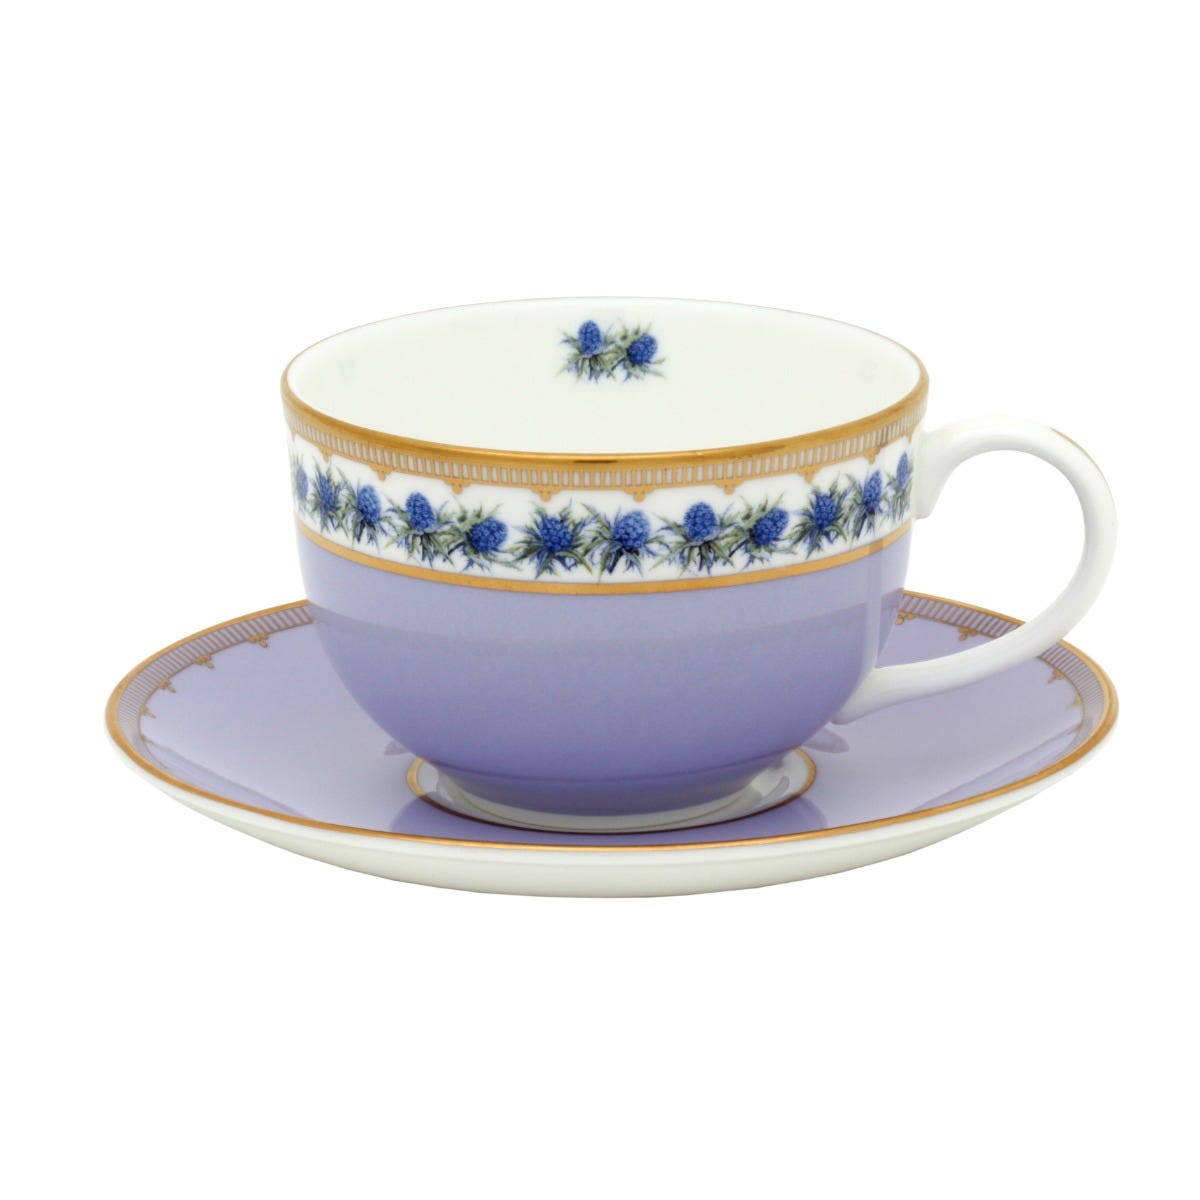 Castle of Mey Floral Thistle Teacup & Saucer in Lilac, Fine Bone China, Halcyon Days